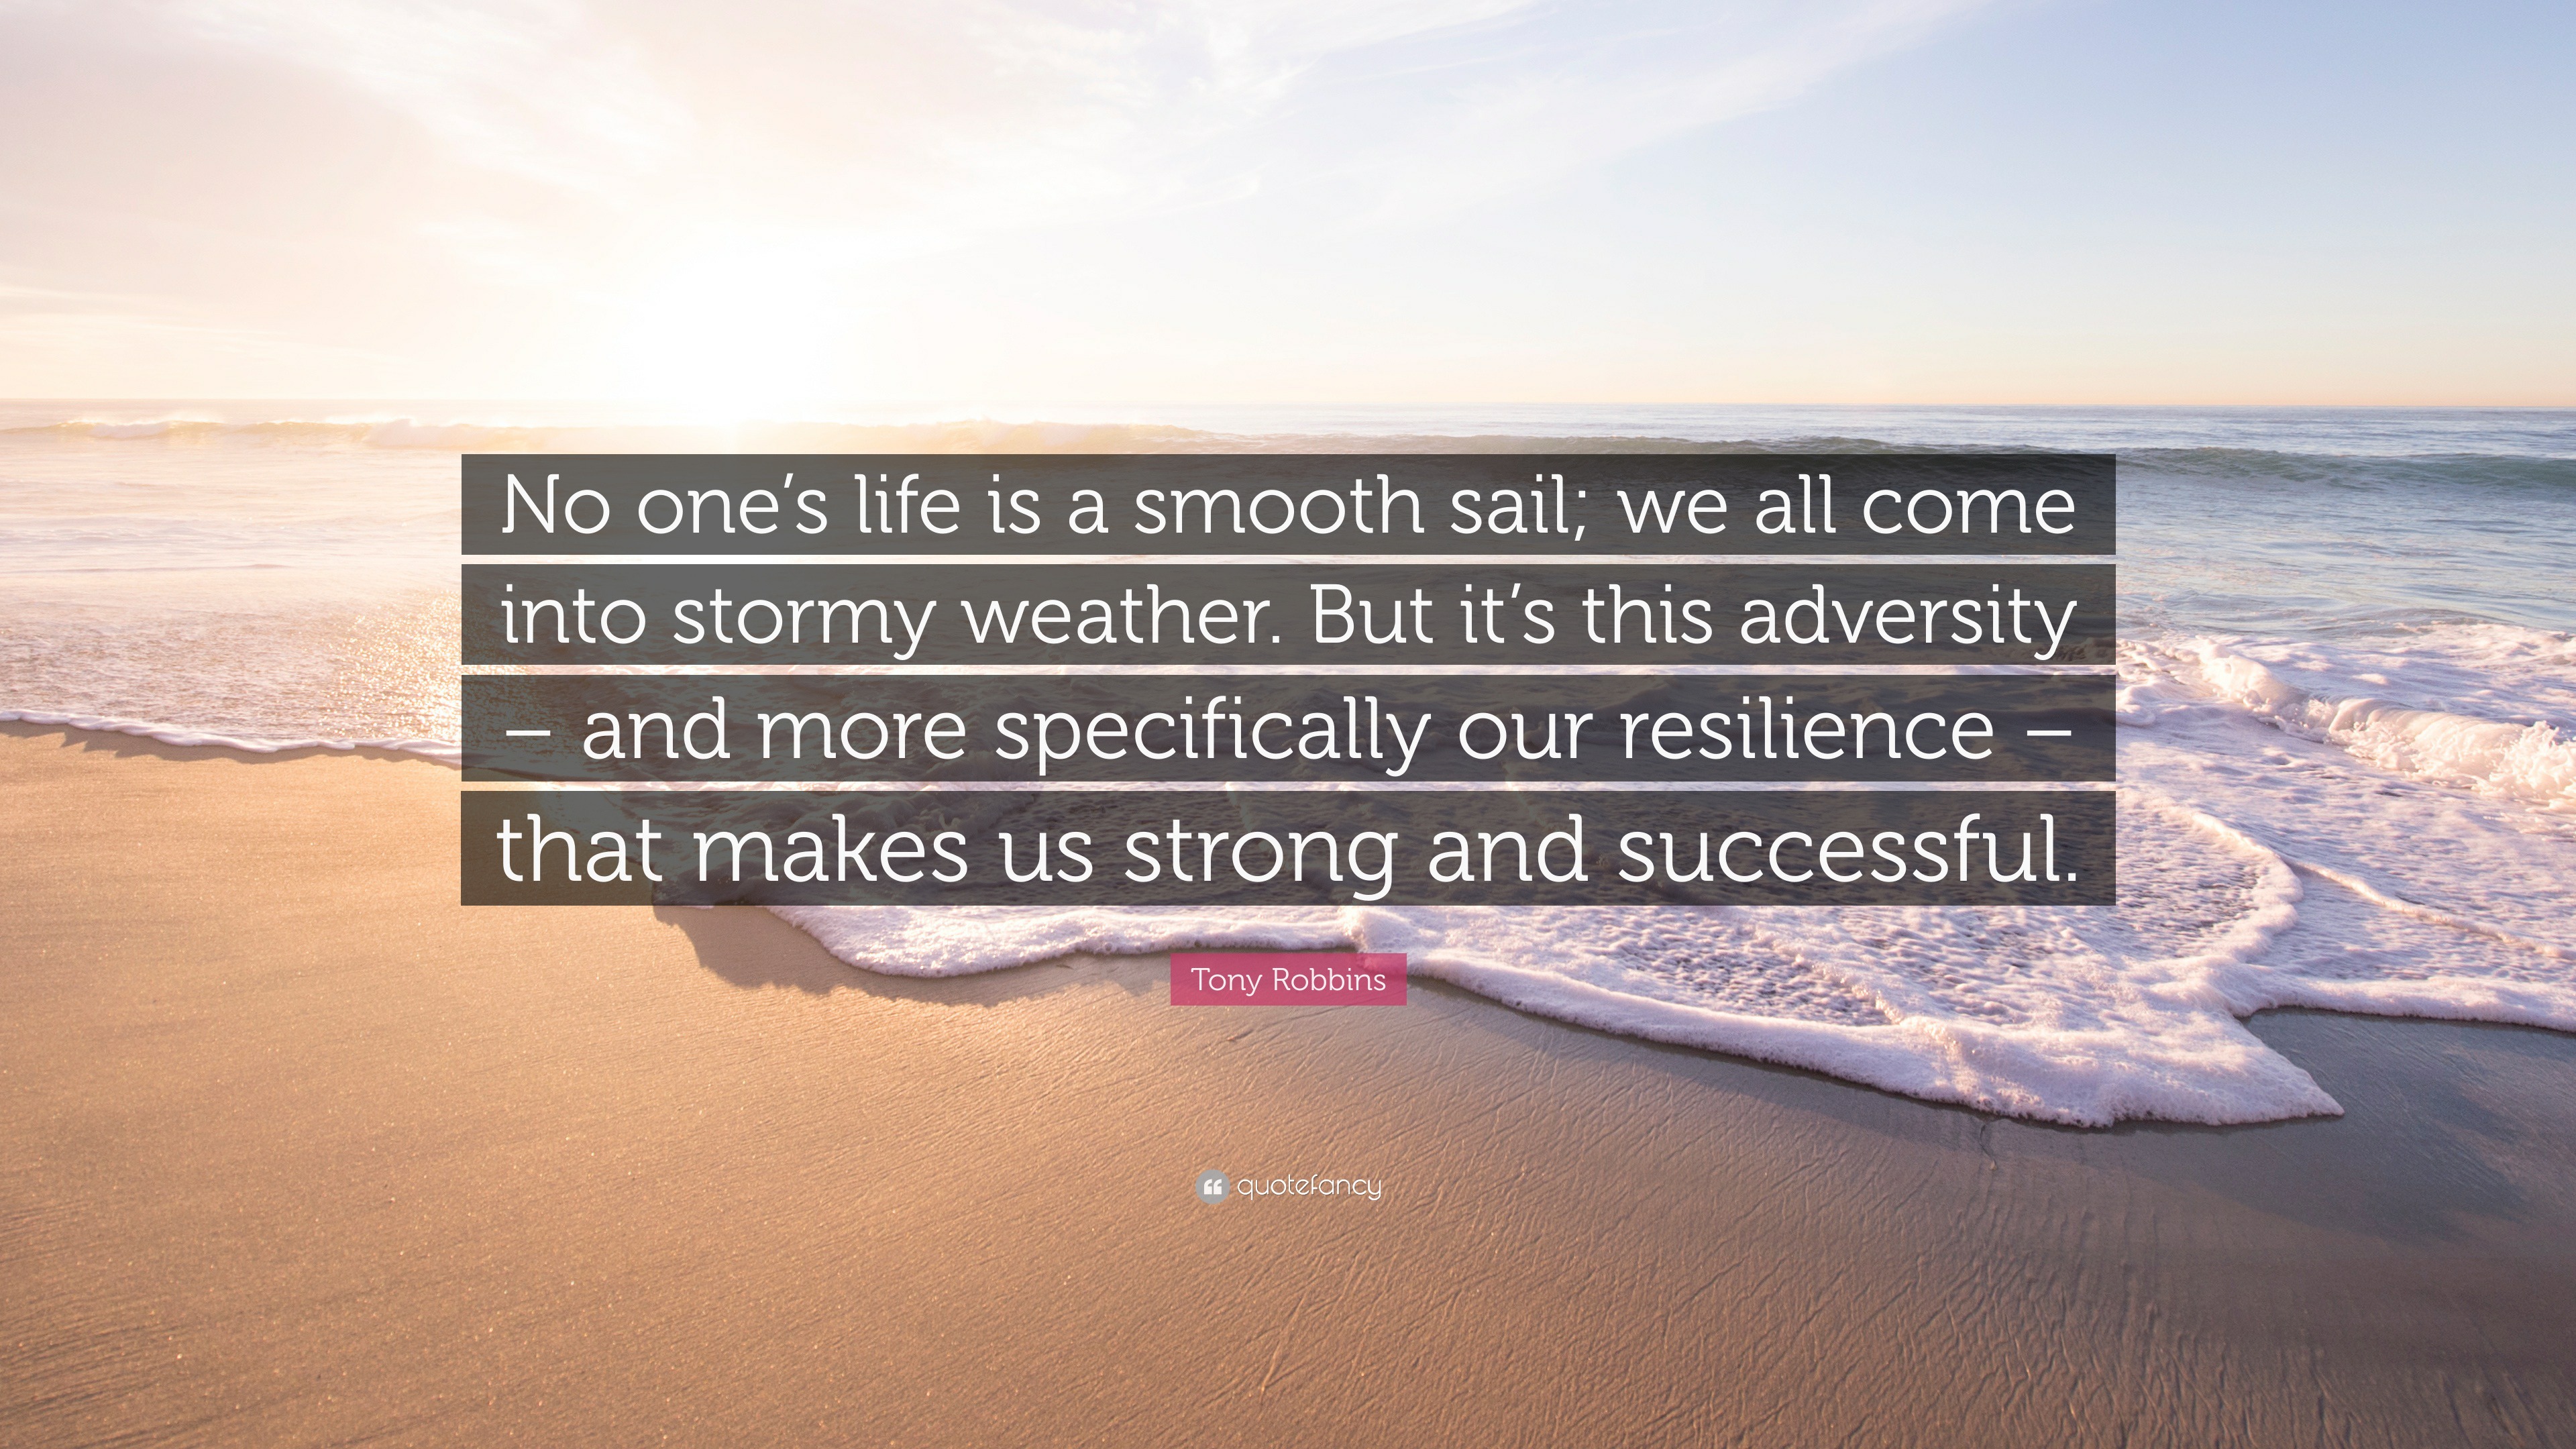 Tony Robbins Quote: “No one's life is a smooth sail; we all come into  stormy weather. But it's this adversity – and more specifically our res”